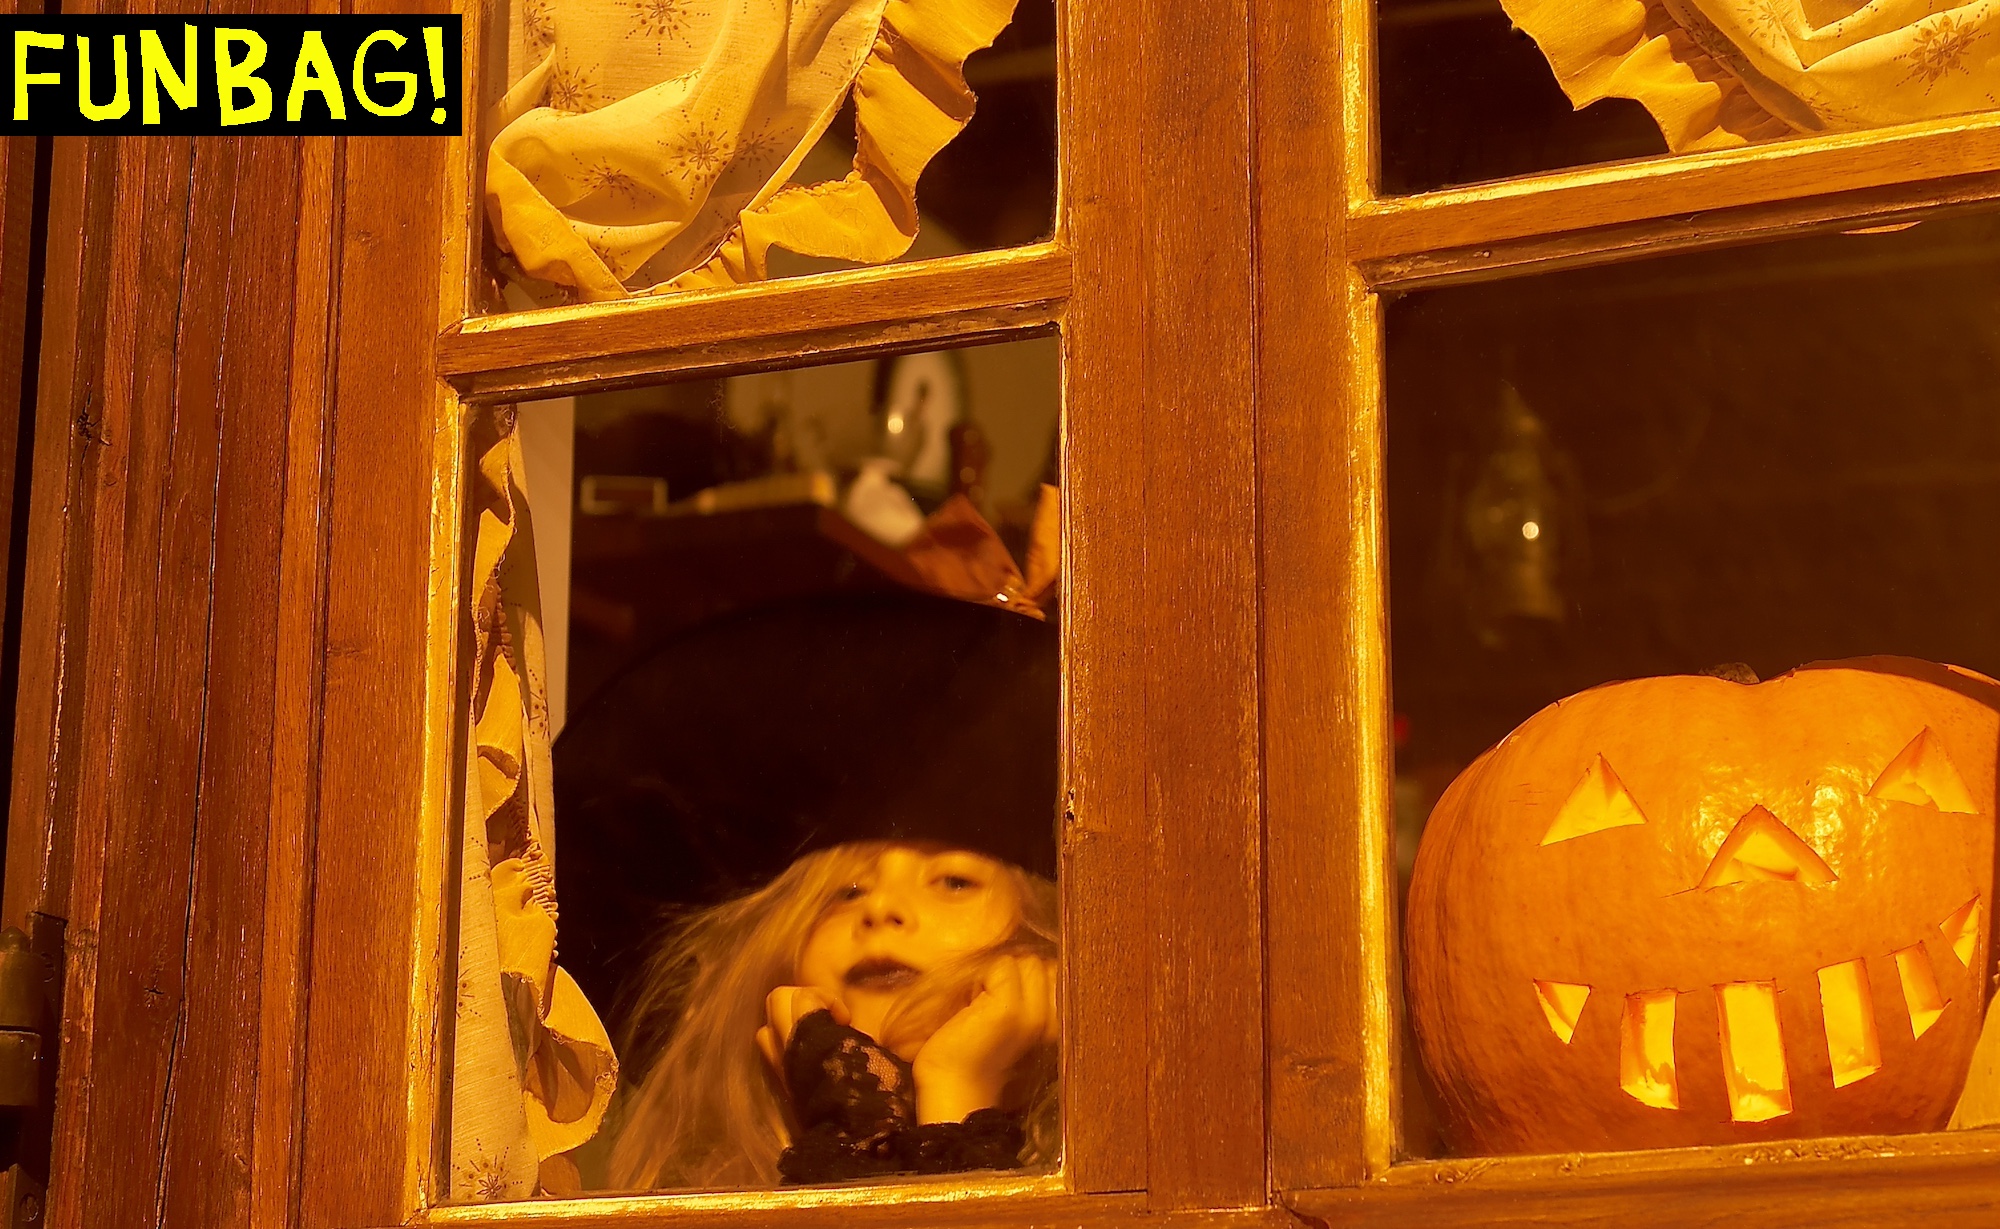 A little girl in a witch outfit and a jack-o-lantern are in a spooky window